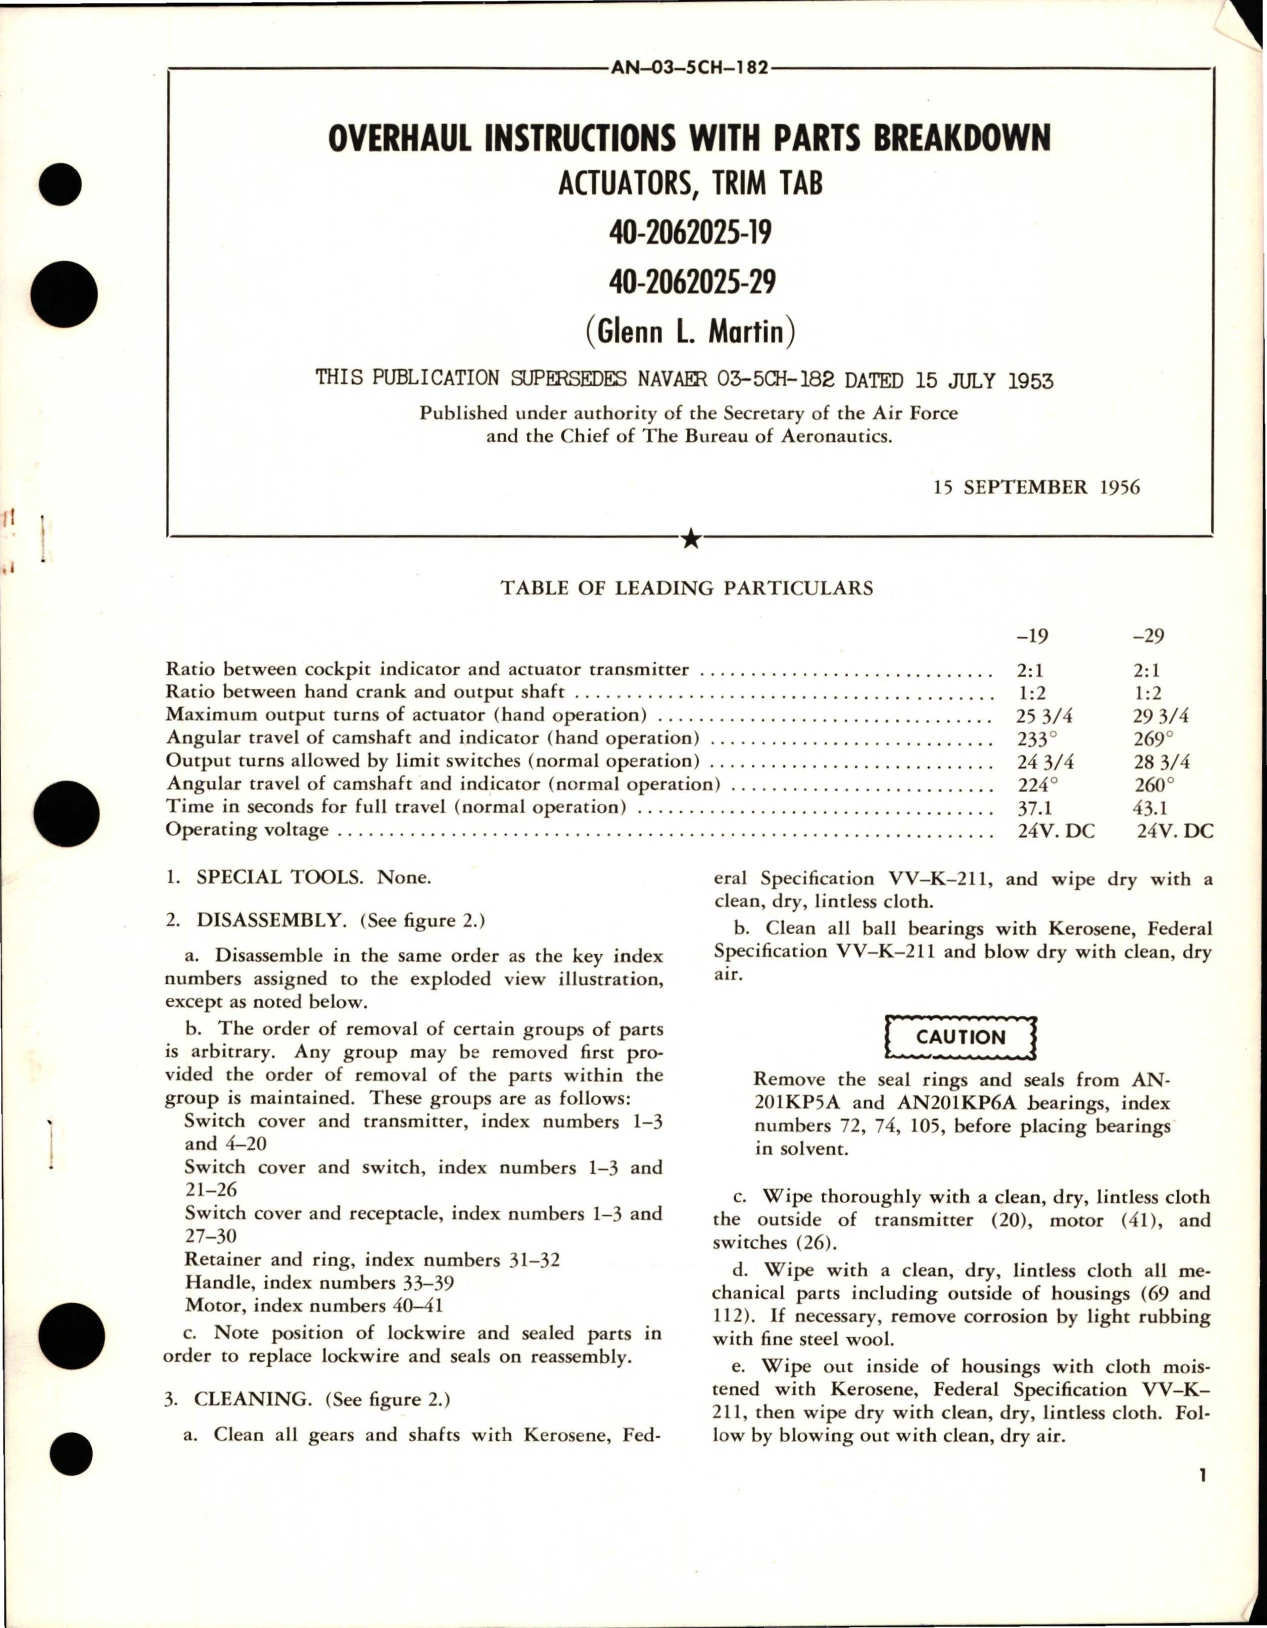 Sample page 1 from AirCorps Library document: Overhaul Instructions with Parts Breakdown for Trim Tab Actuator - 40-2062025-19 and 40-2062025-29